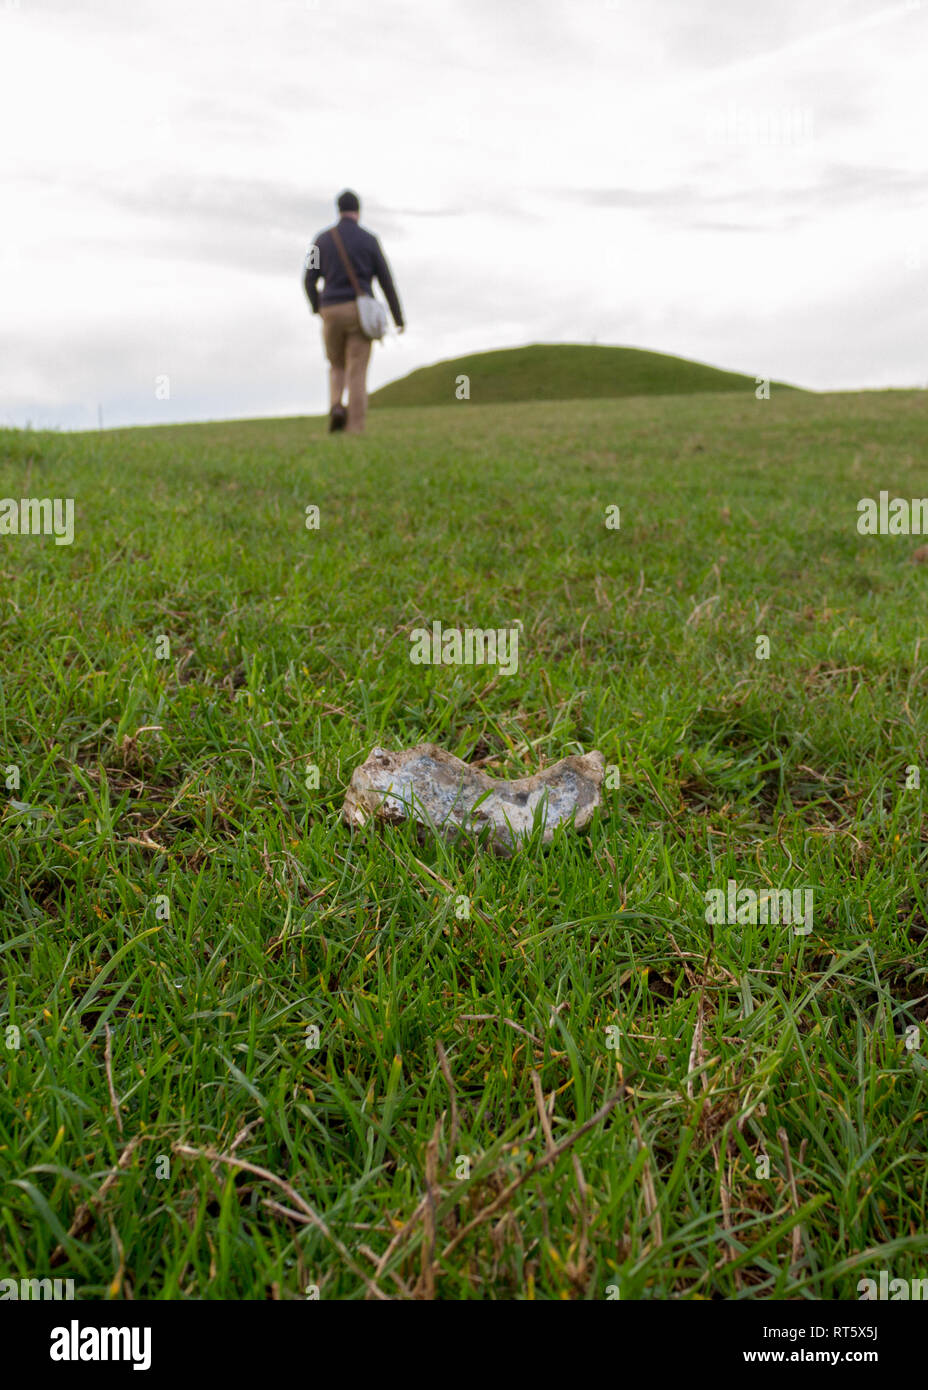 Close-up of a flint lying in the grass with, out of focus in the background, a solitary male figure working towards a bronze age burial mound Stock Photo